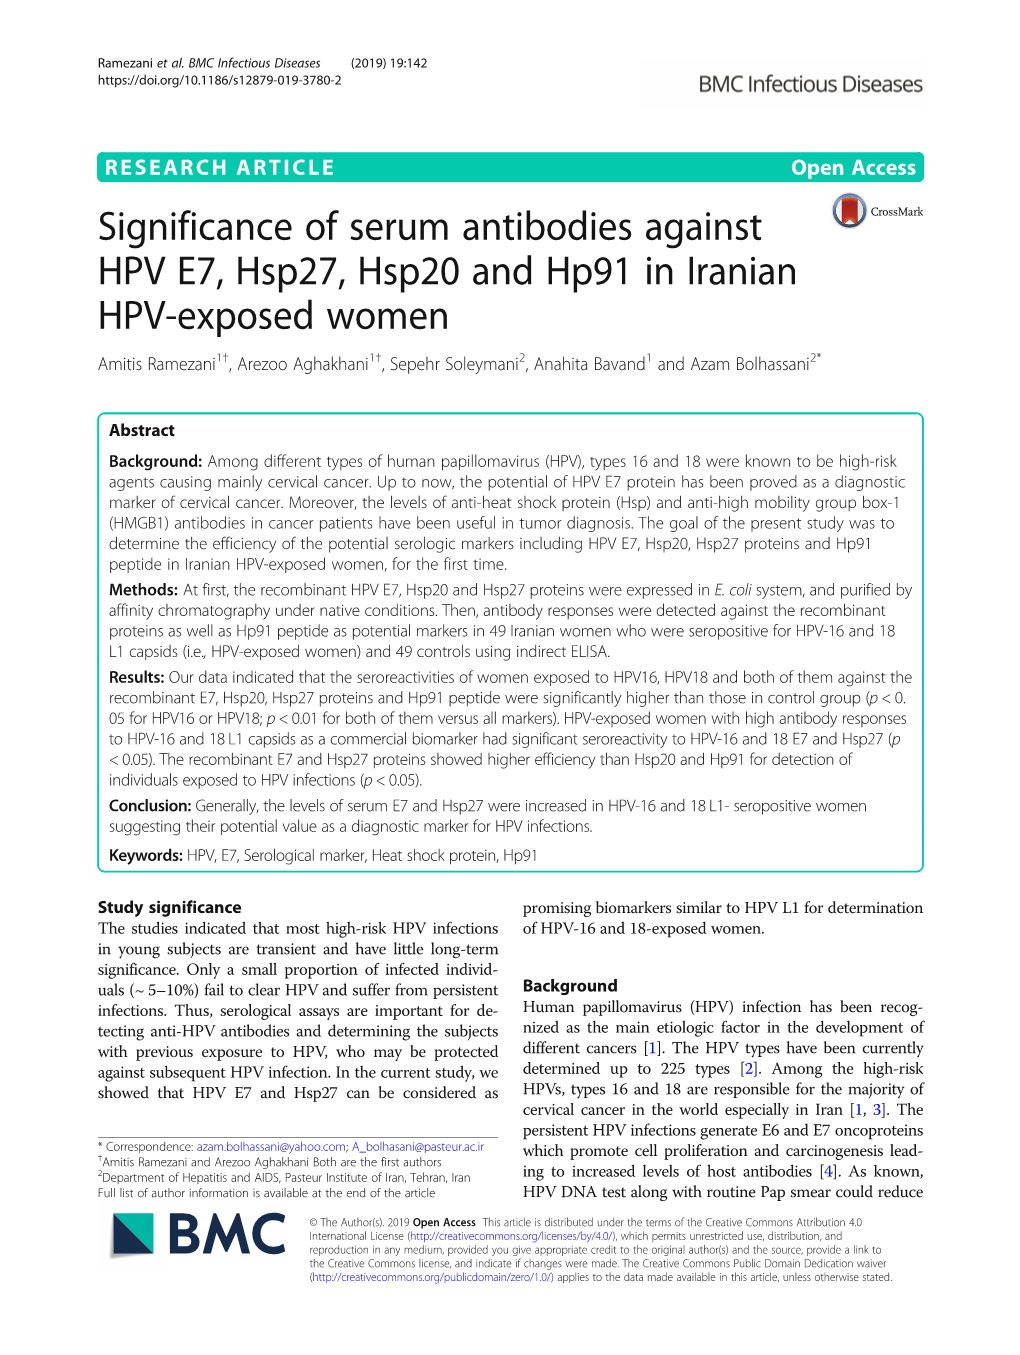 Significance of Serum Antibodies Against HPV E7, Hsp27, Hsp20 And